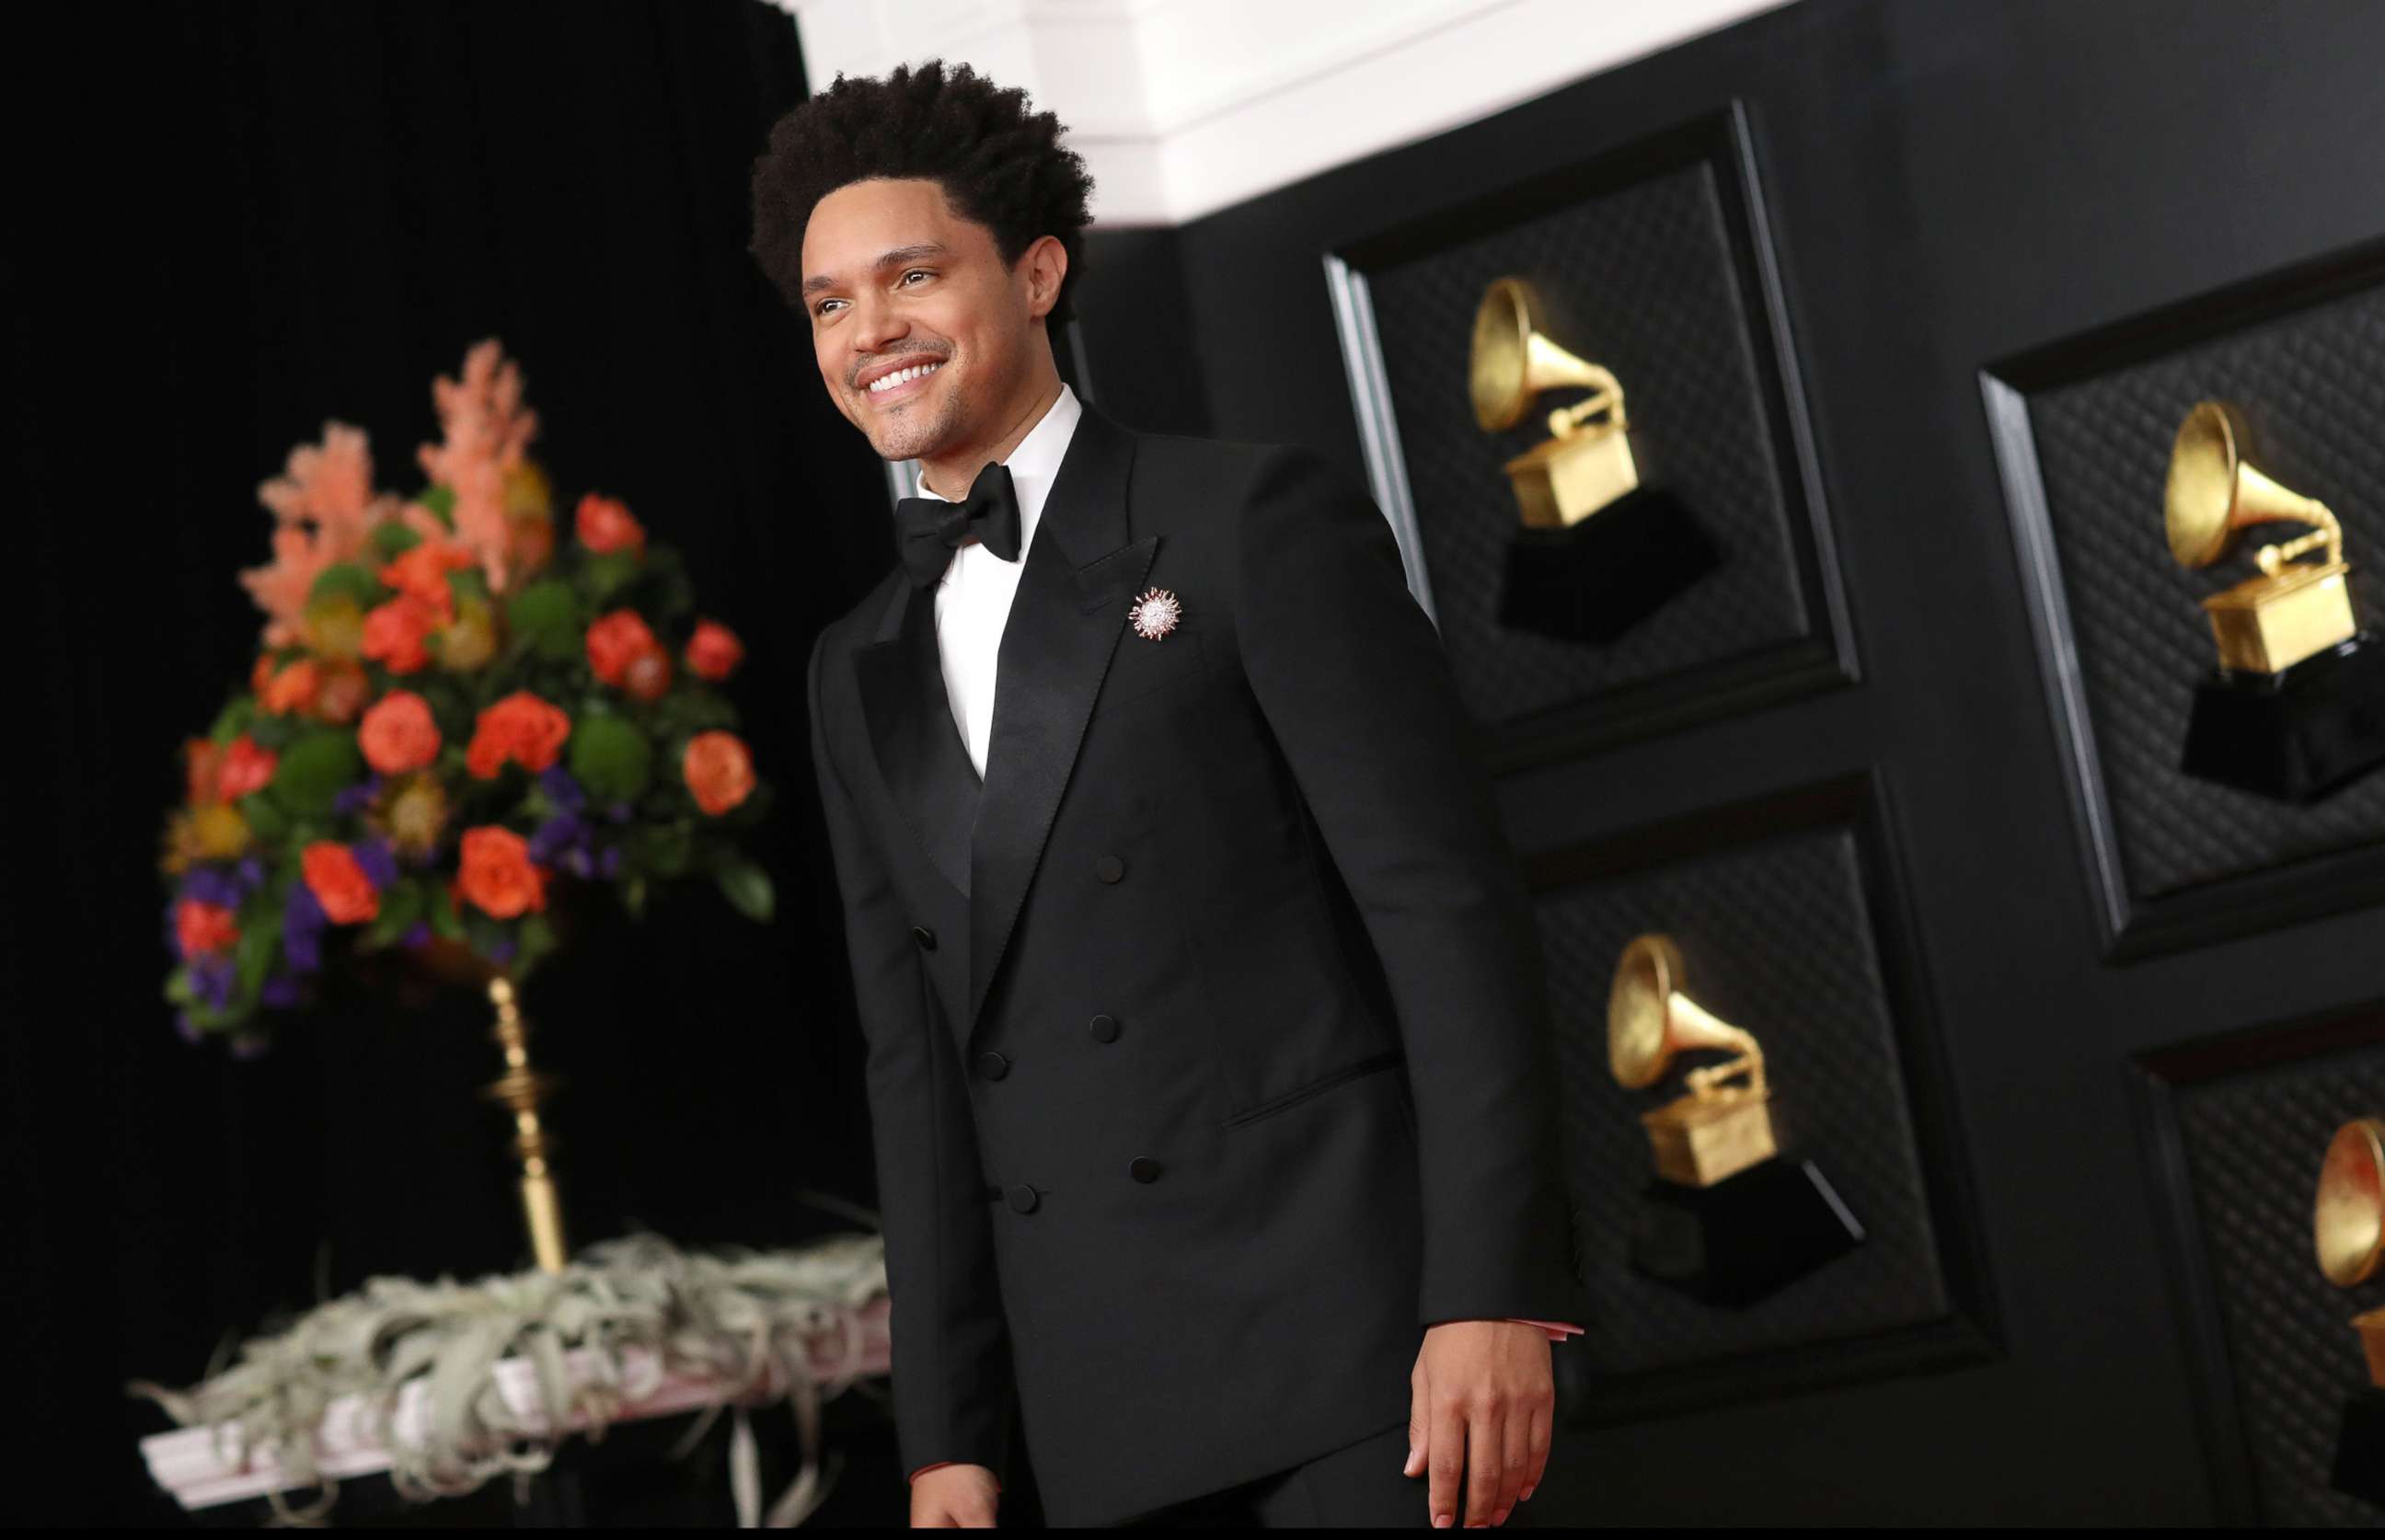 PHOTO: Host Trevor Noah on the red carpet at the 63rd Annual Grammy Awards, at the Los Angeles Convention Center, Los Angeles, Mar. 14, 2021.